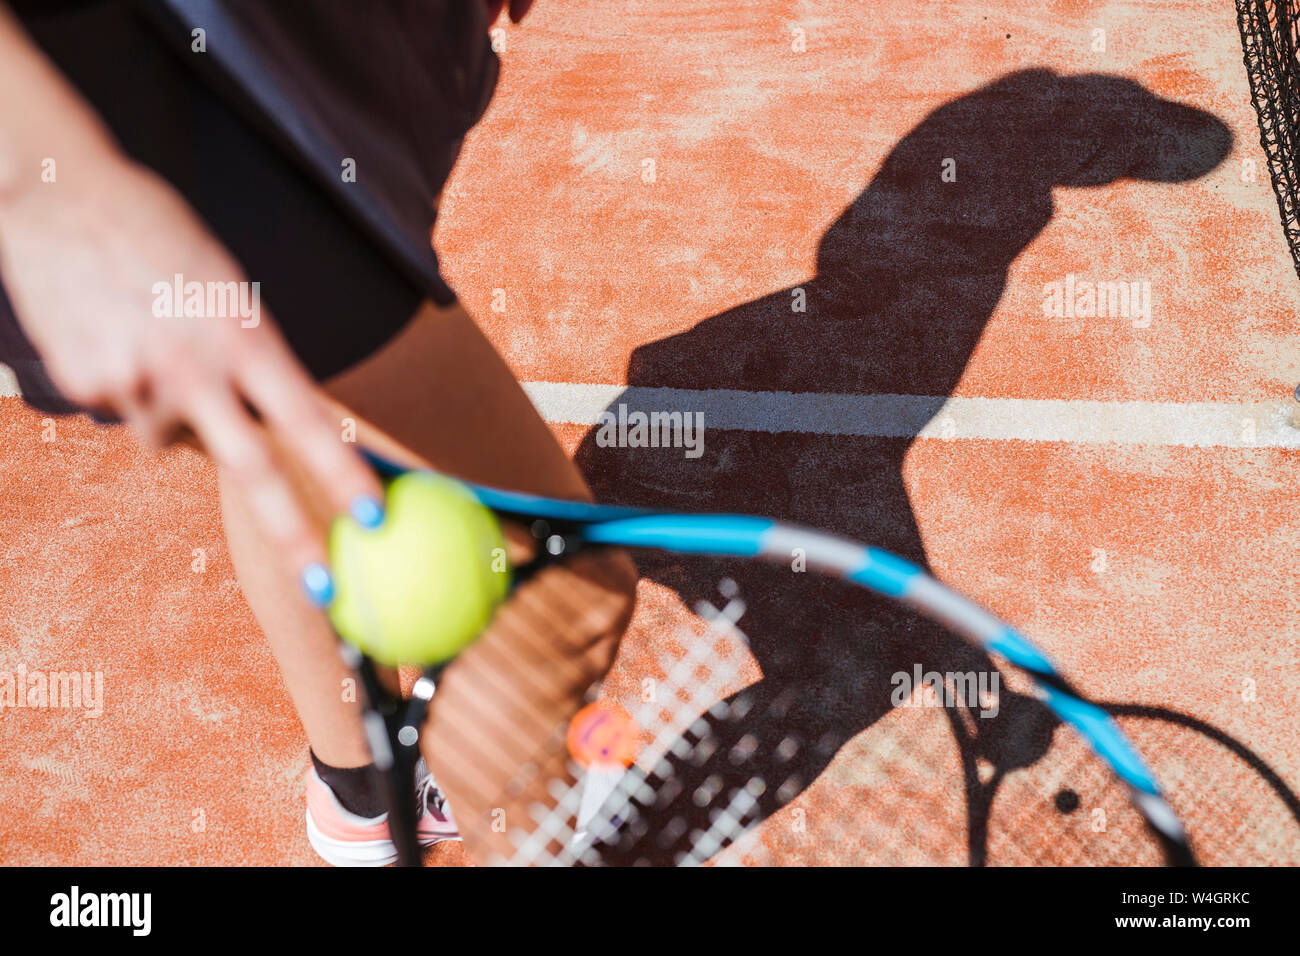 Close-up of female tennis player on court Stock Photo